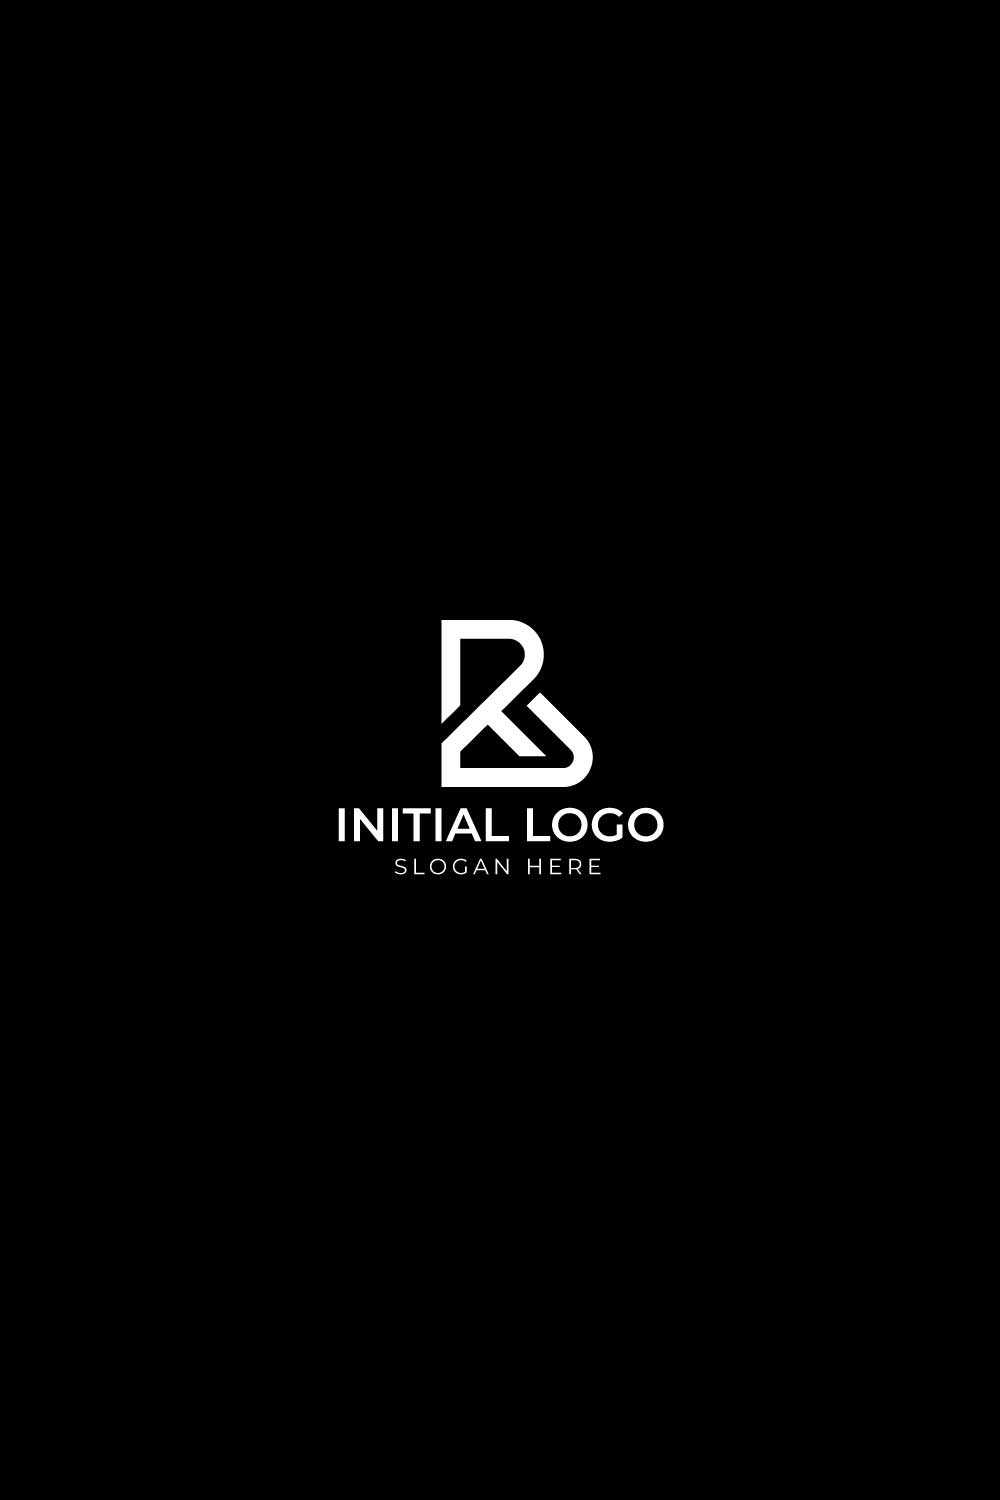 Minimal Innovative Initial AS logo and SA logo Letter pinterest preview image.